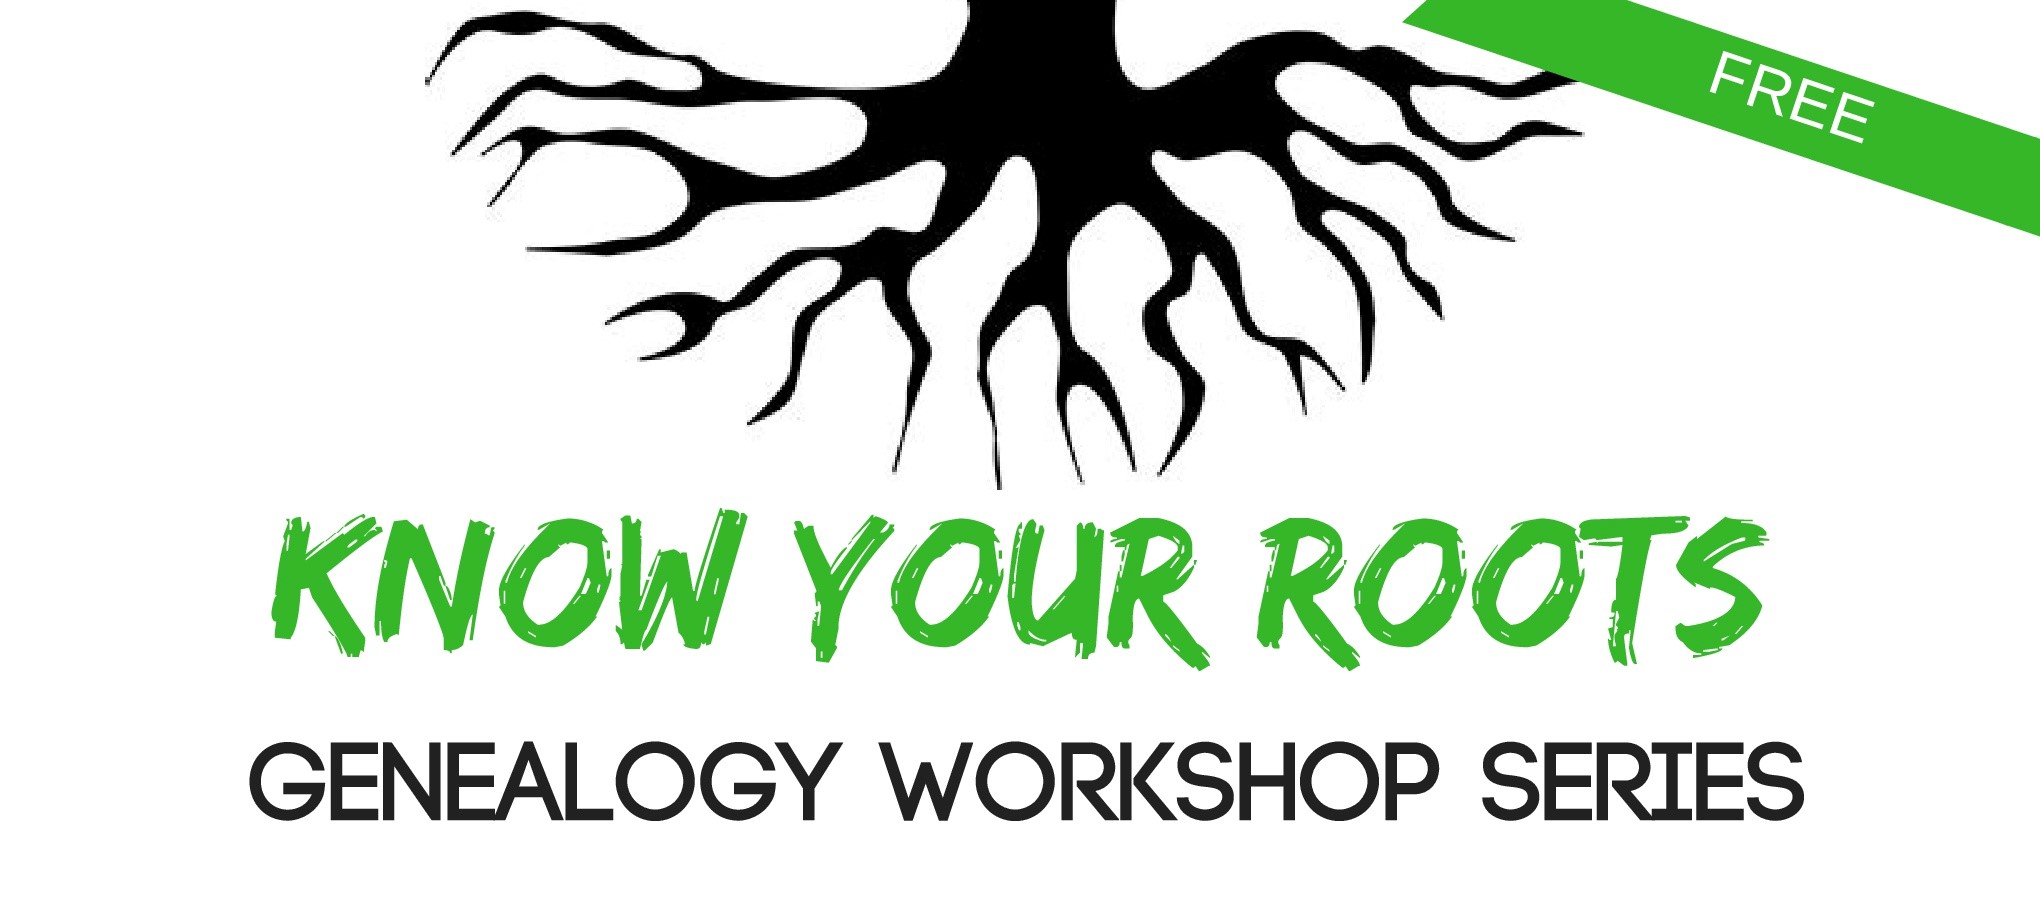 illustration of tree roots and words know your roots